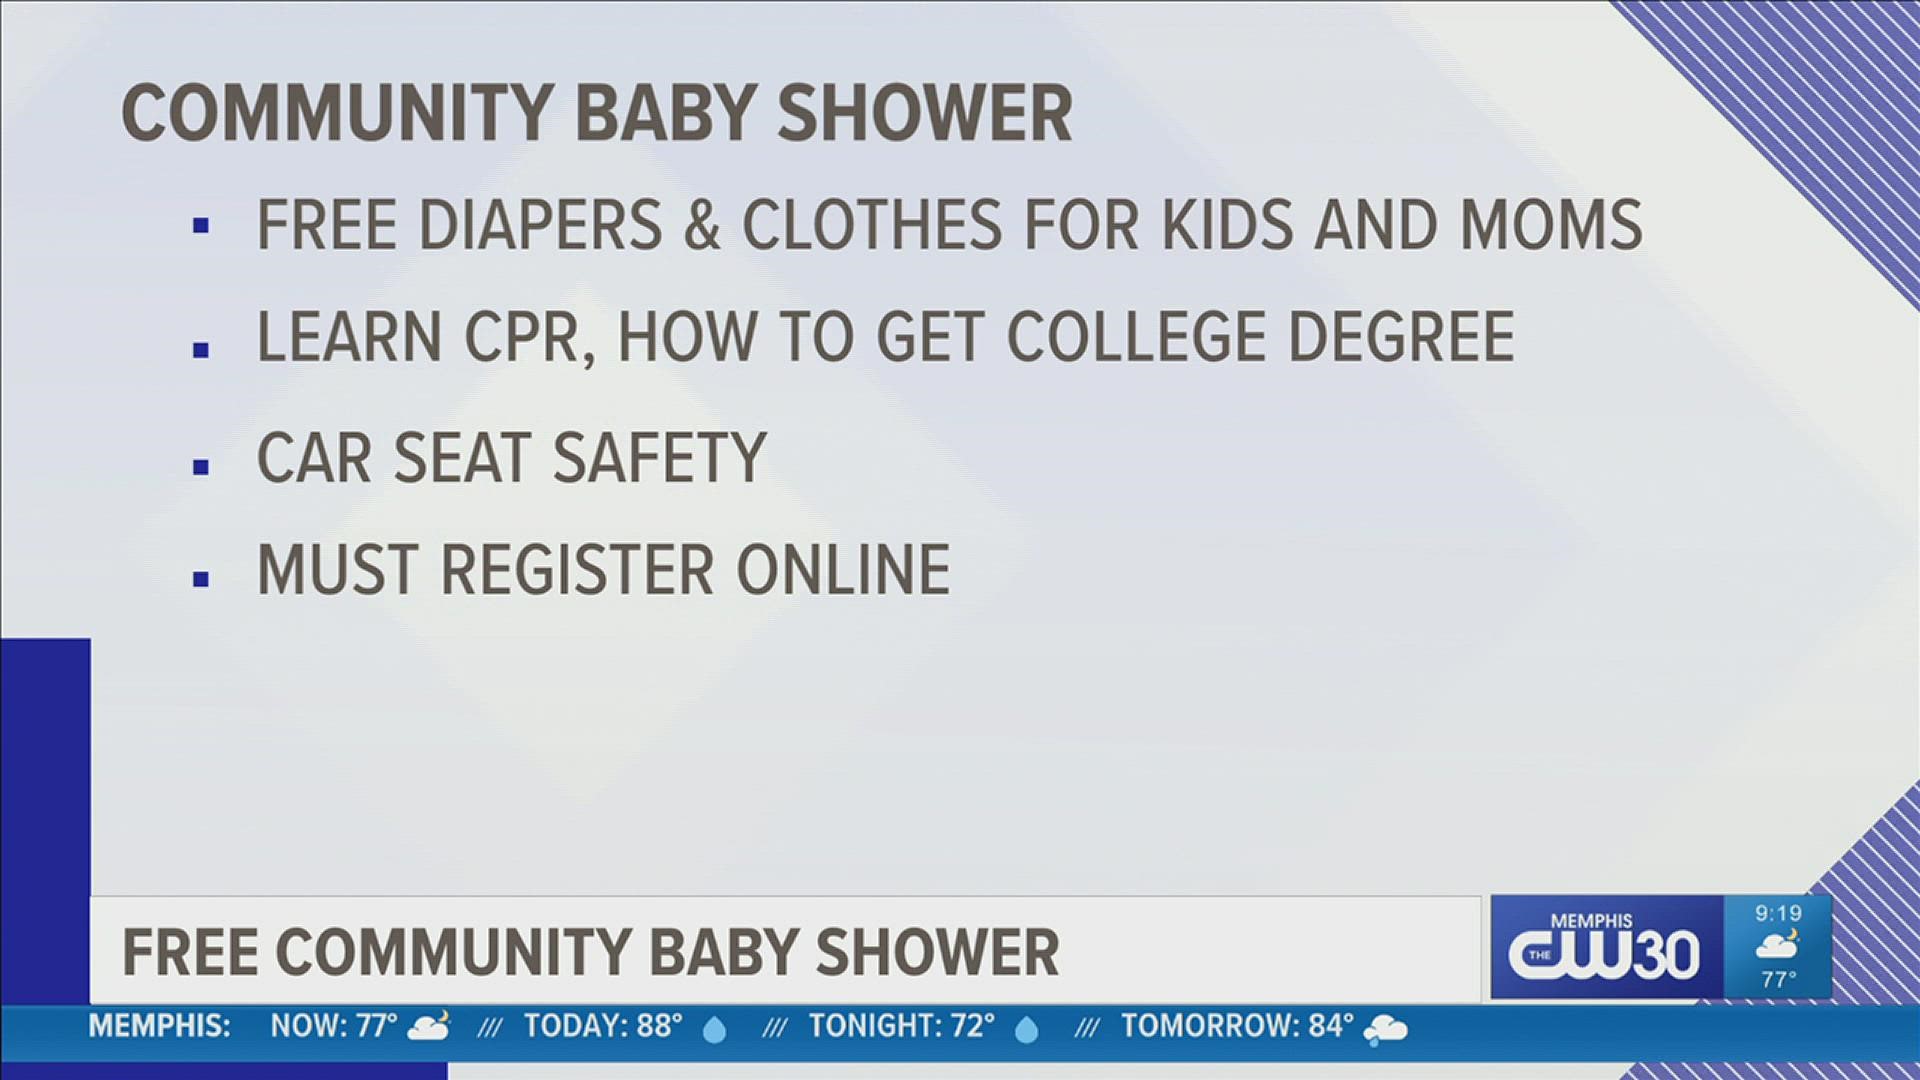 State Representative G.A. Hardaway is holding a community-wide baby shower